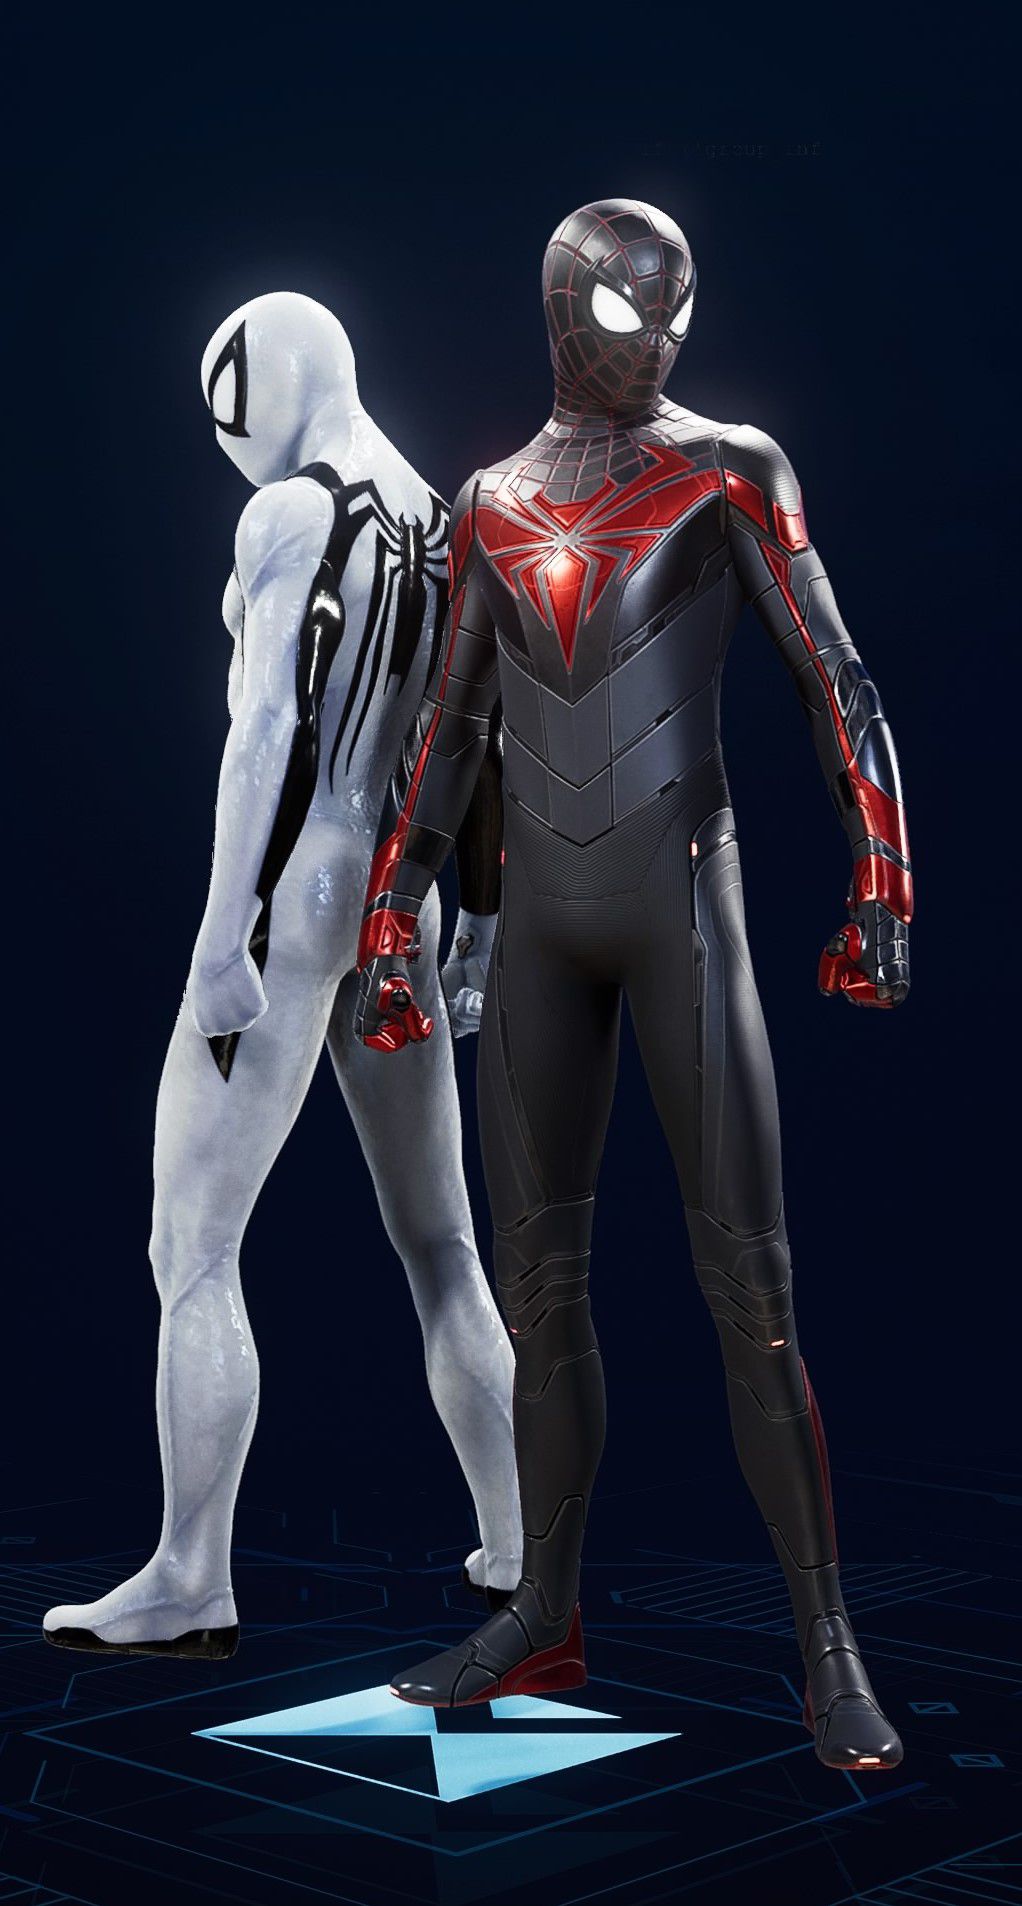 Miles Morales stands in his Advanced Tech Suit in the suit selection screen of Spider-Man 2.